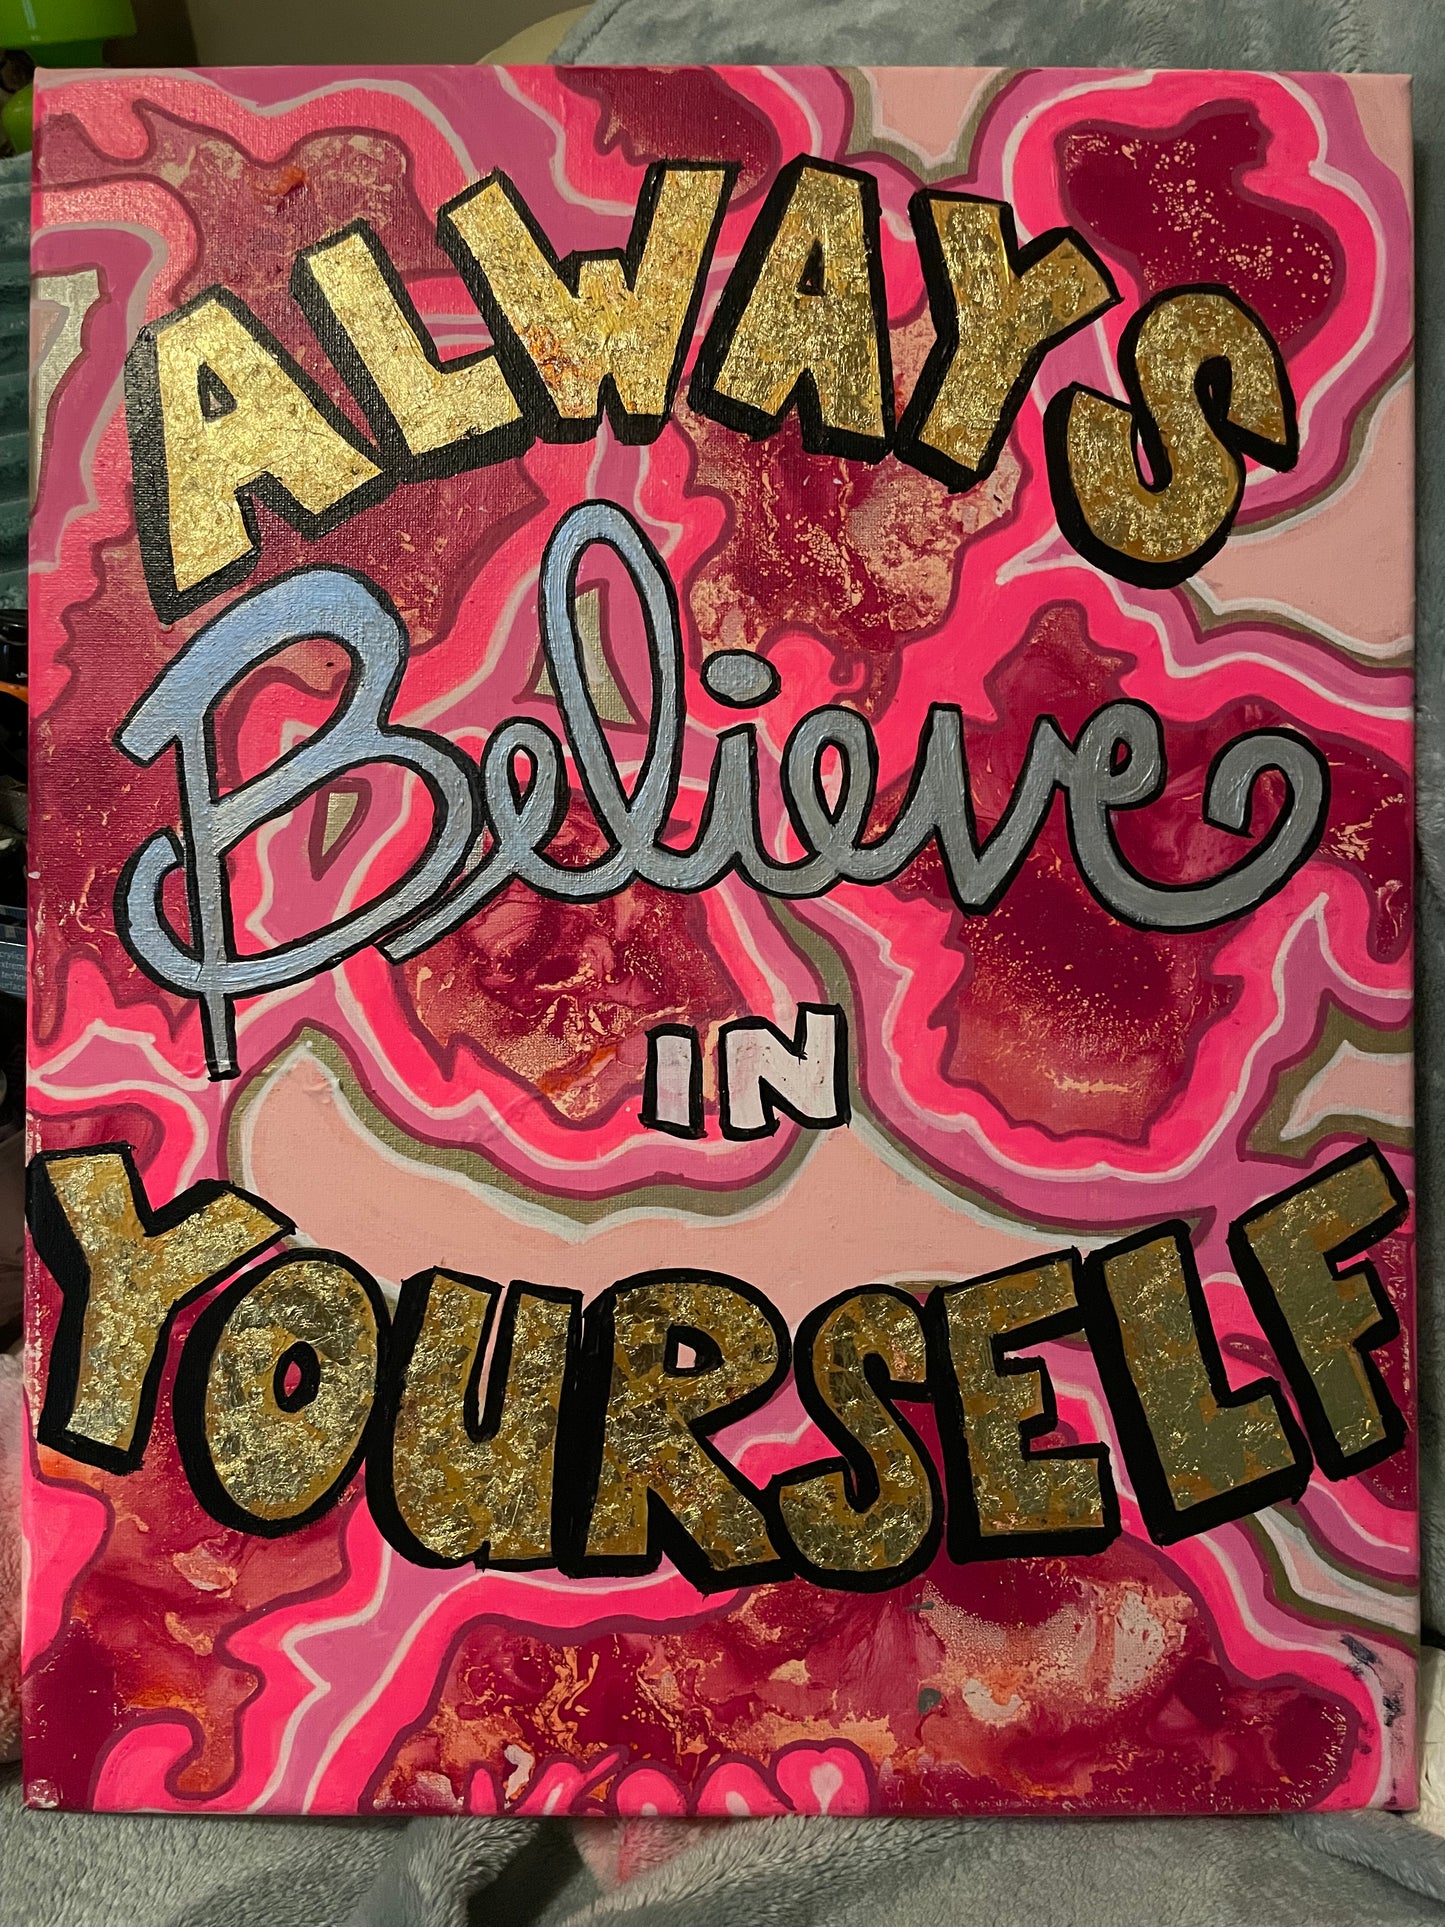 “Always Believe in Yourself” mixed media on canvas 24” x 18”